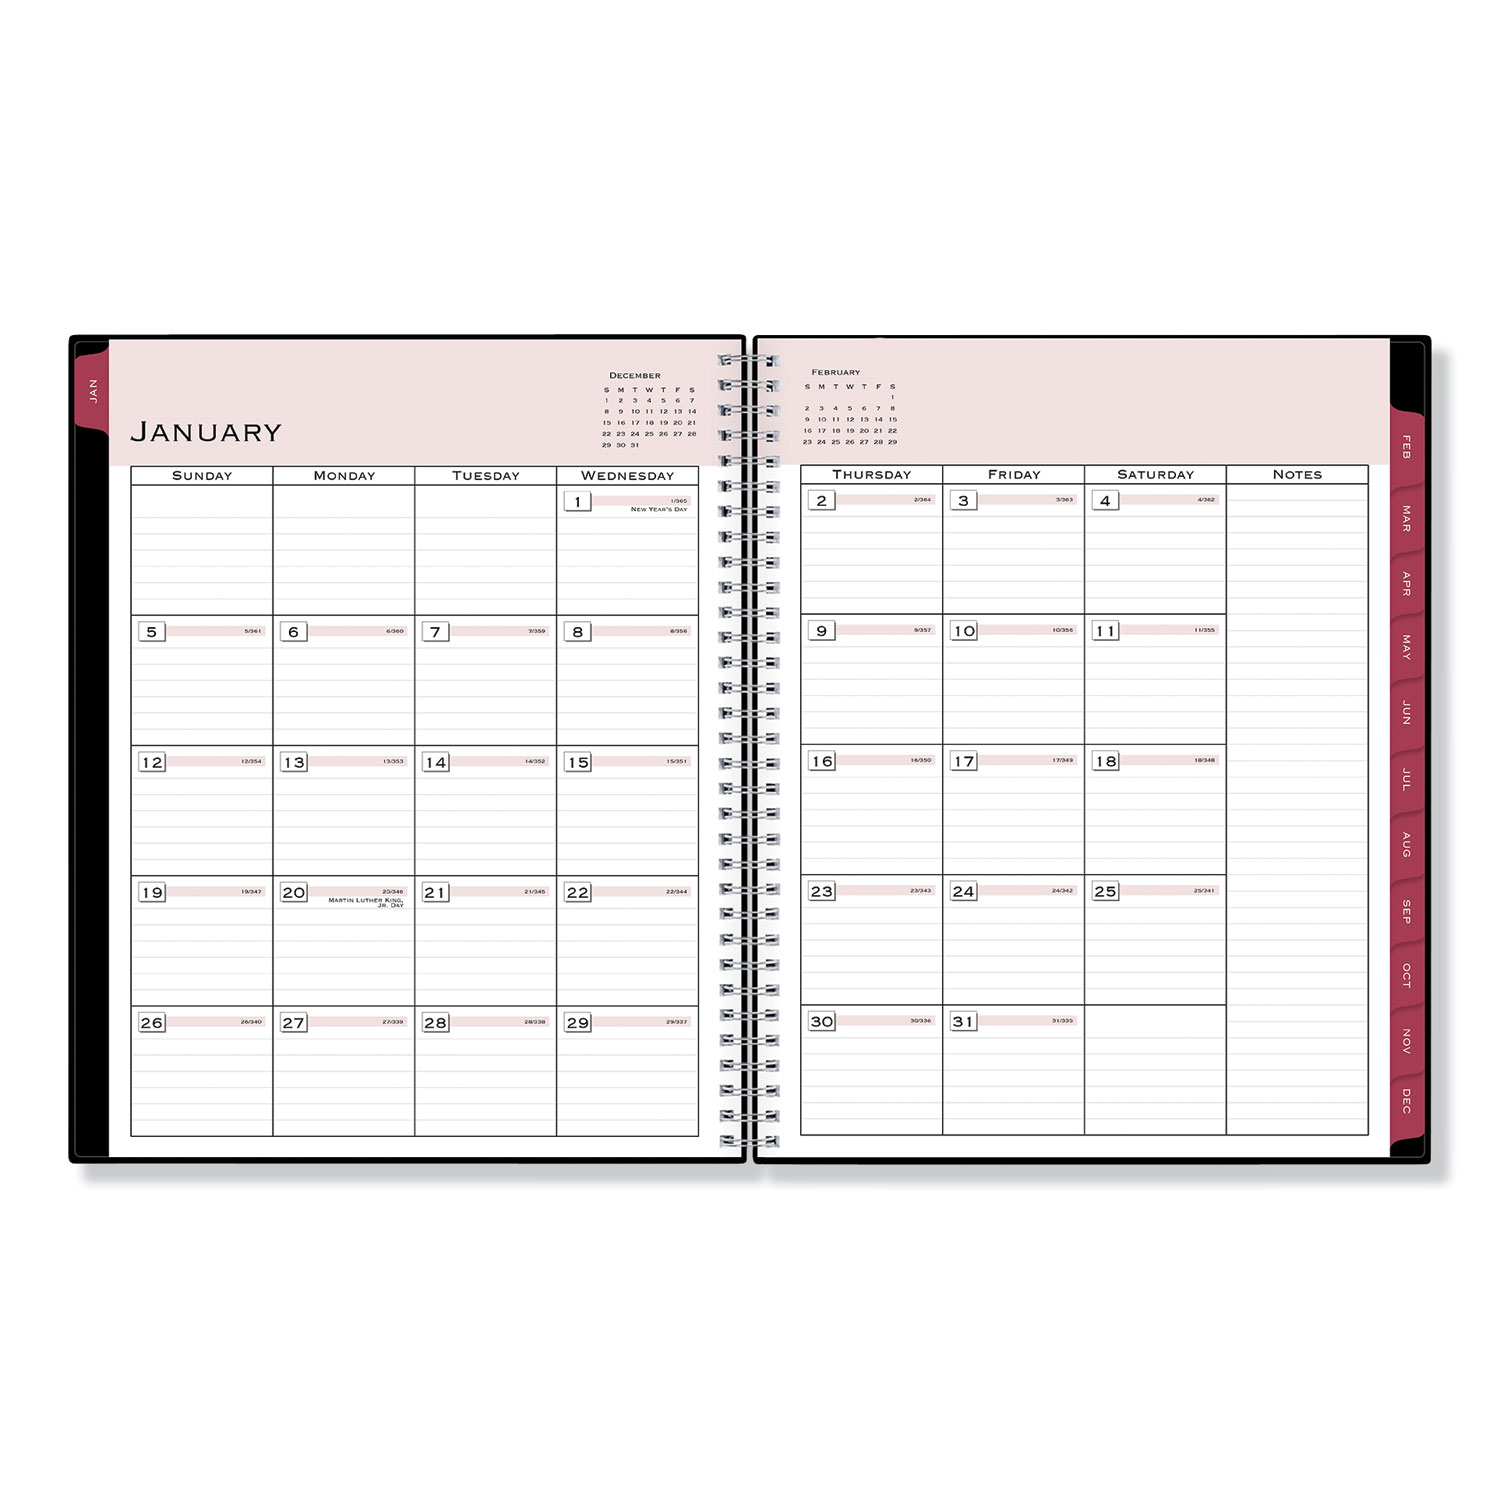 Classic Red Weekly/Monthly Planner, Open Scheduling, 11 x 8 1/2, Black Cover, 2020